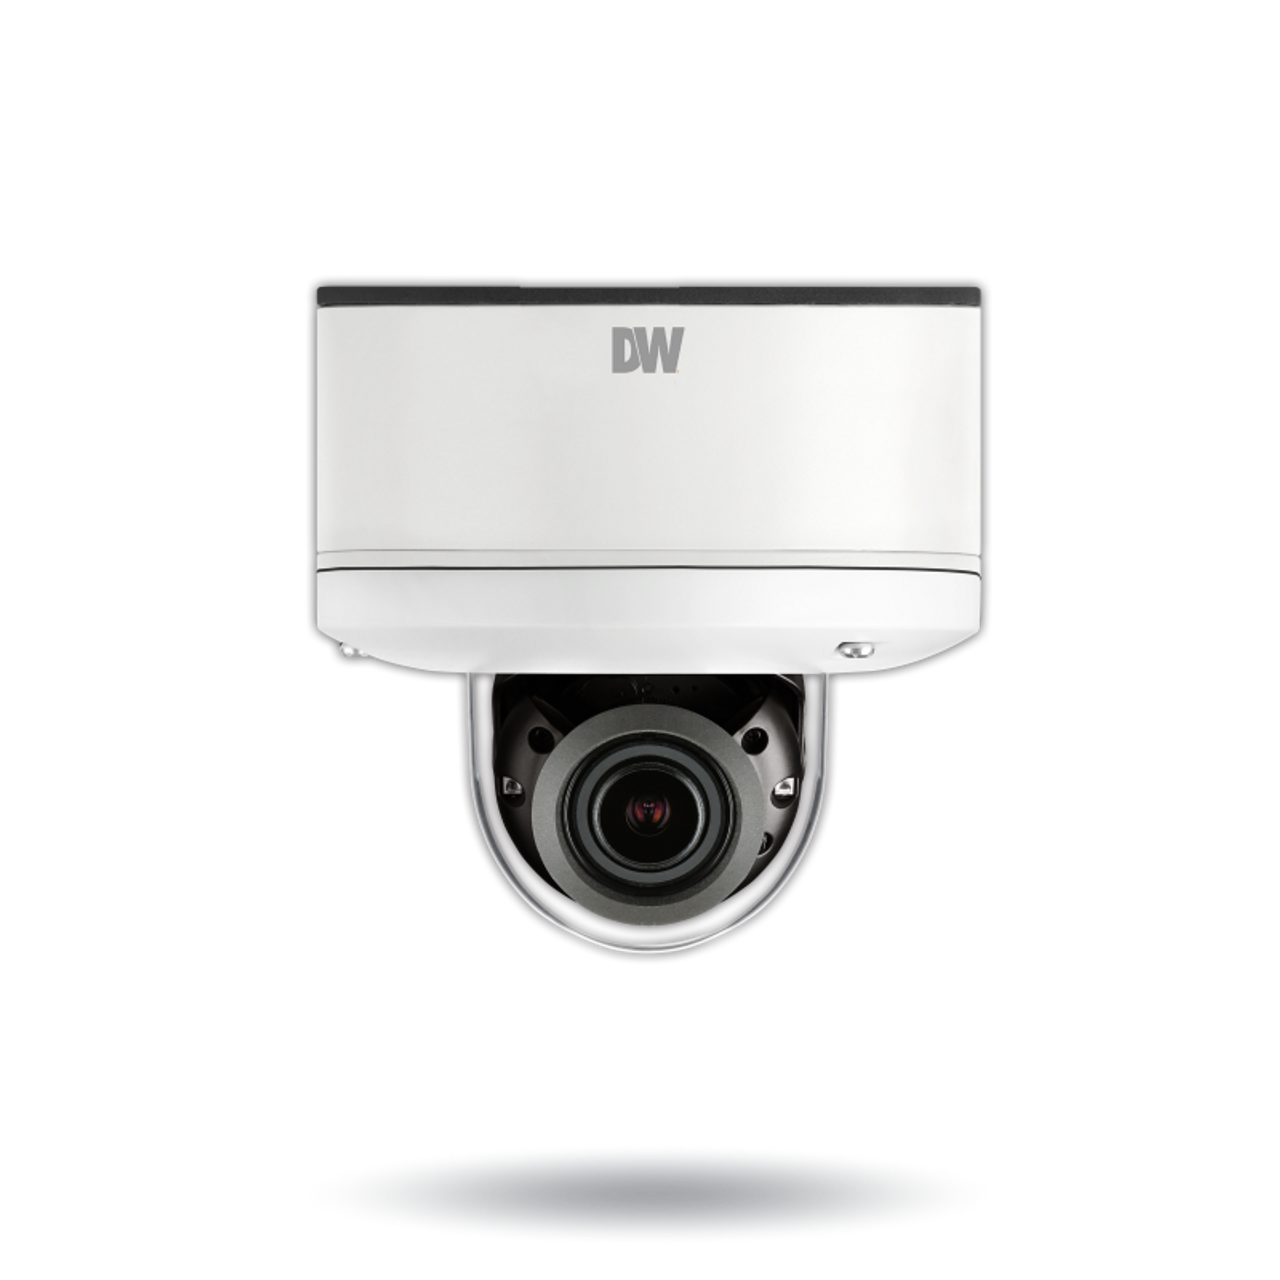 Digital Watchdog DWC-MV45WiATW 5MP Night Vision Outdoor Dome IP Security Camera with IVA